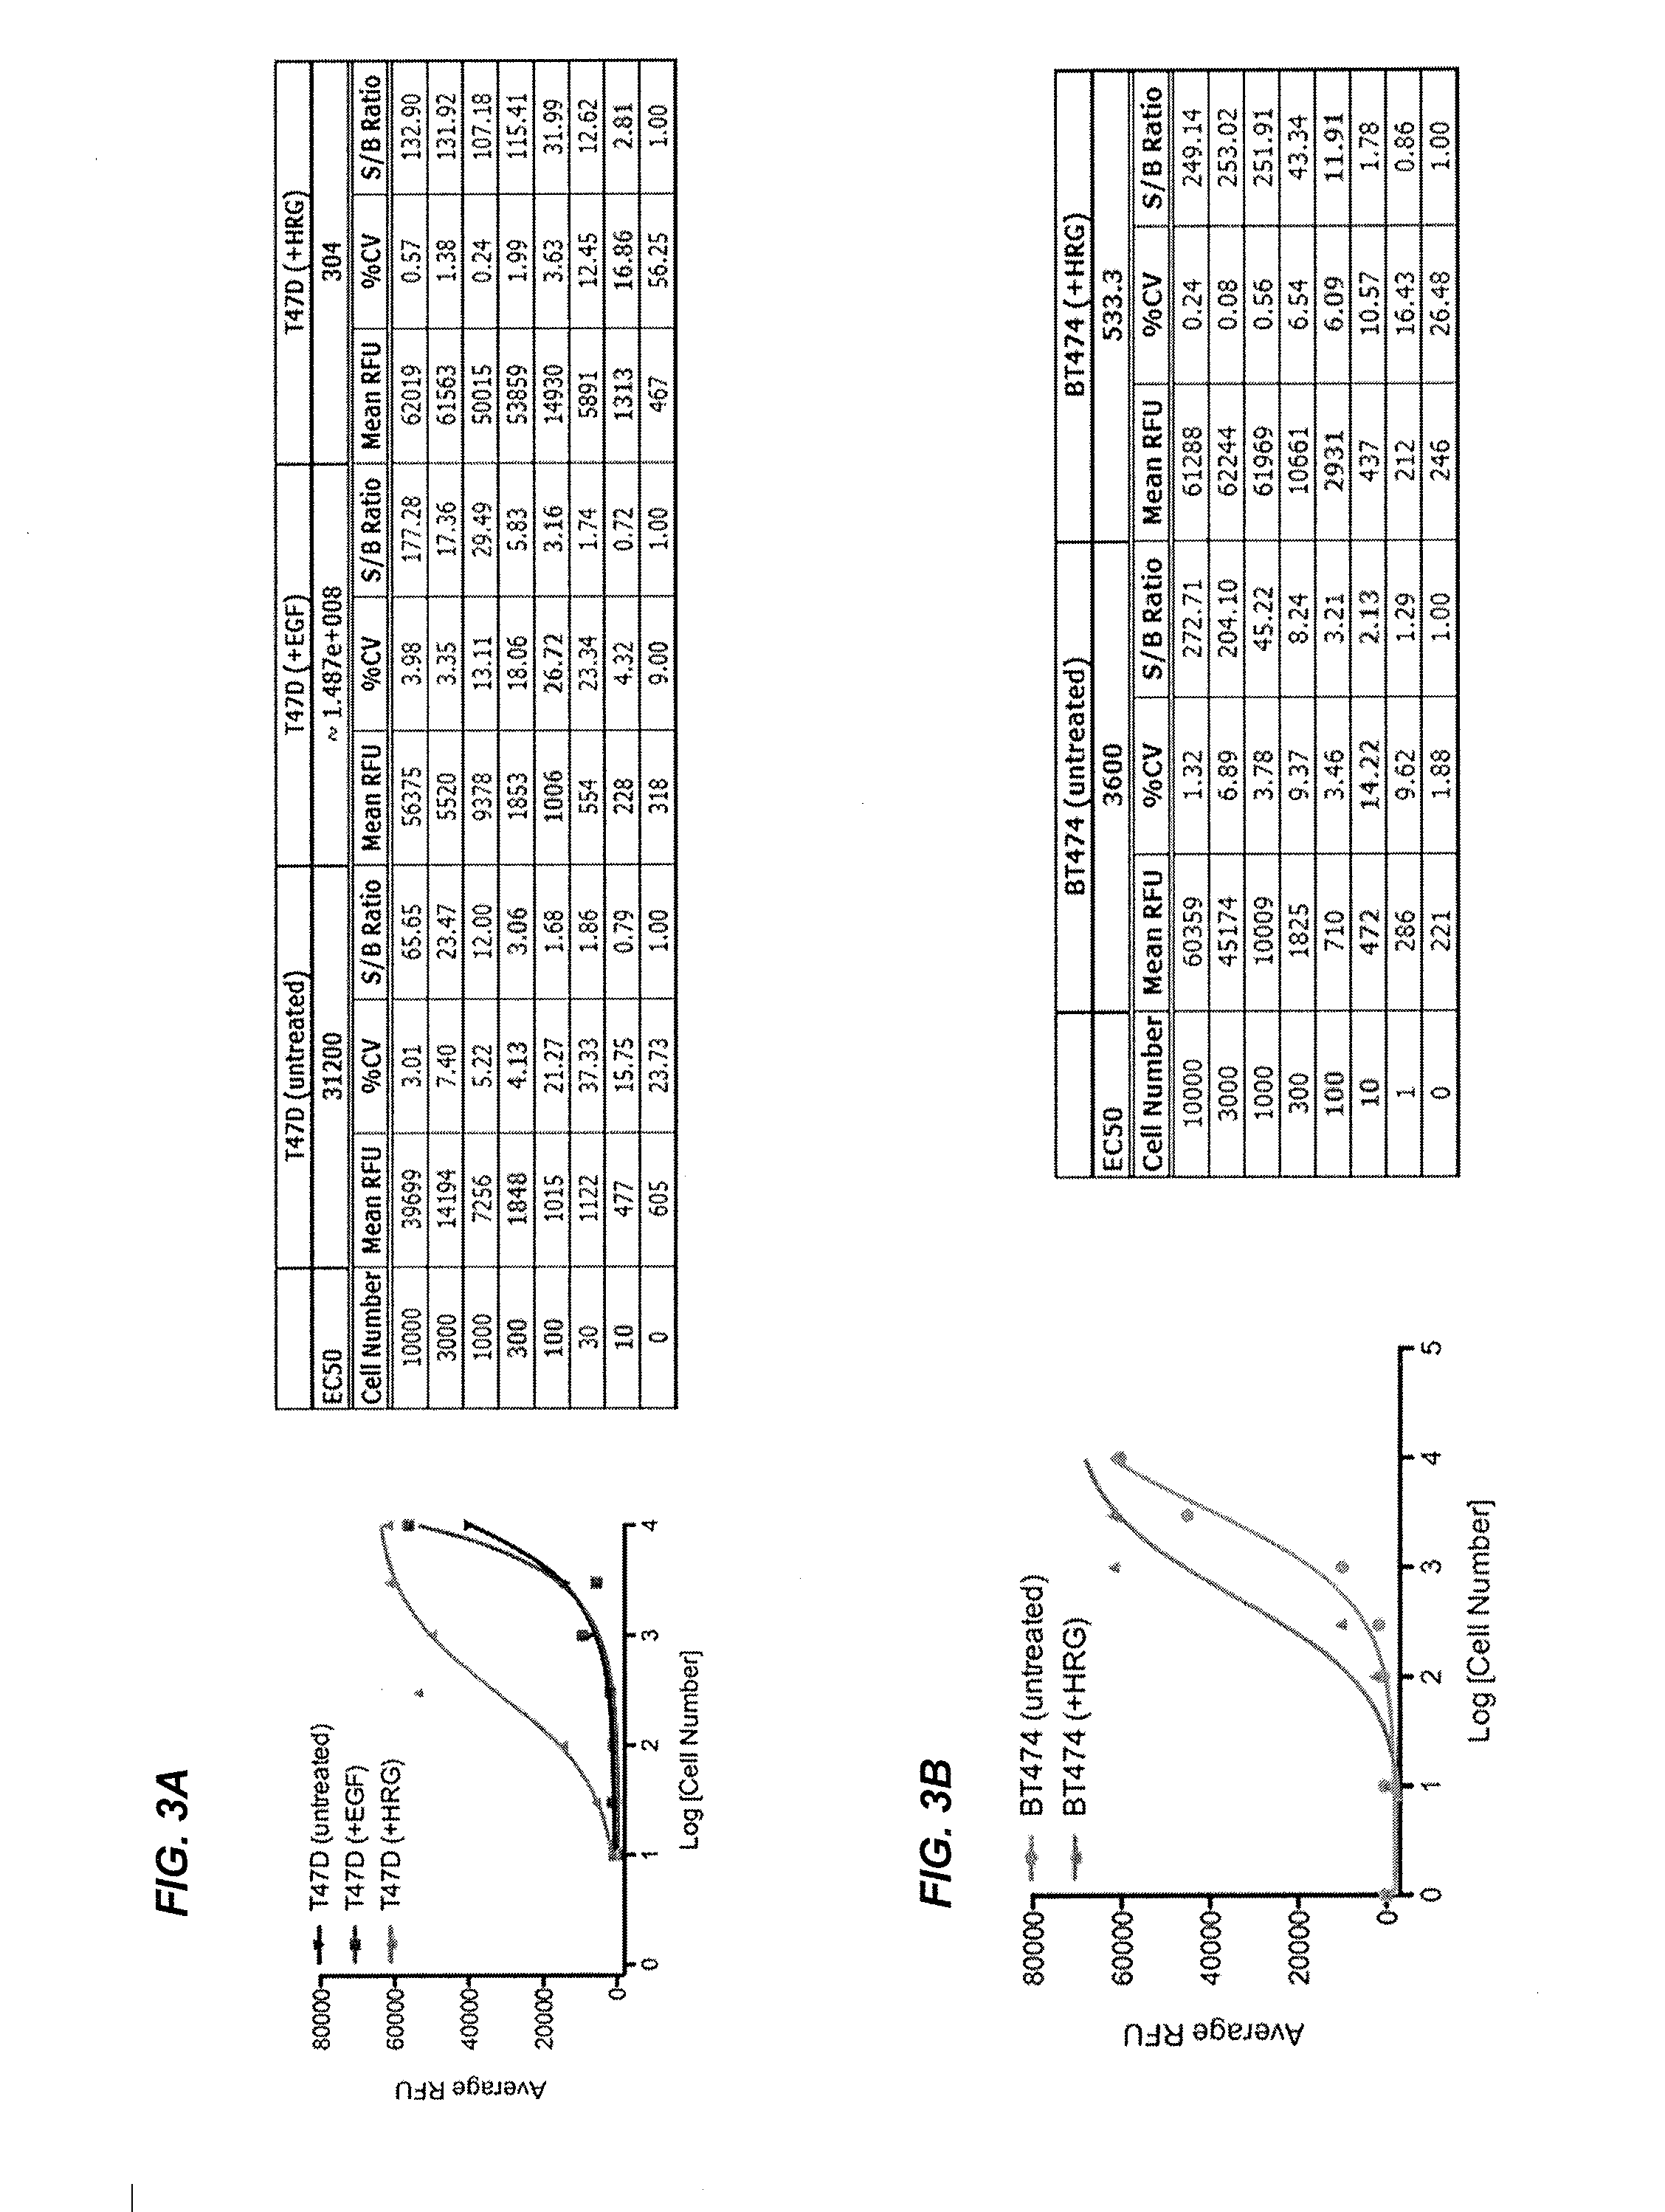 Method of therapy selection for patients with cancer